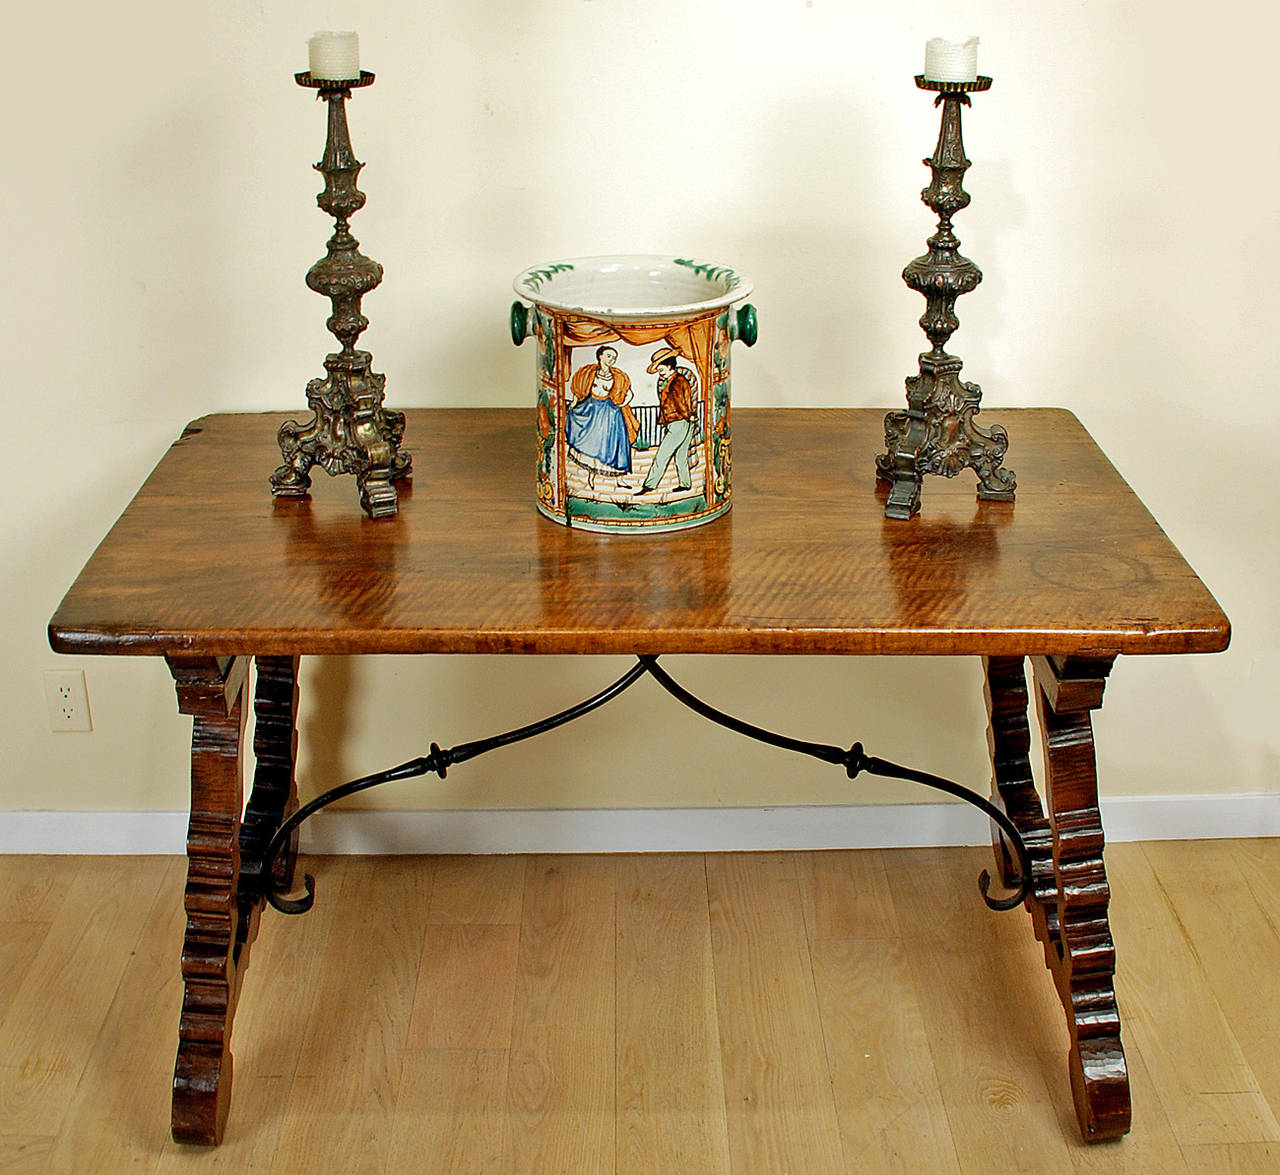 A very fine Spanish Baroque walnut center table, first half 18th century, with a thick single board rectangular top raised on scrolled trestle supports and joined by arched iron stretchers. Overall with excellent color, wear and surface